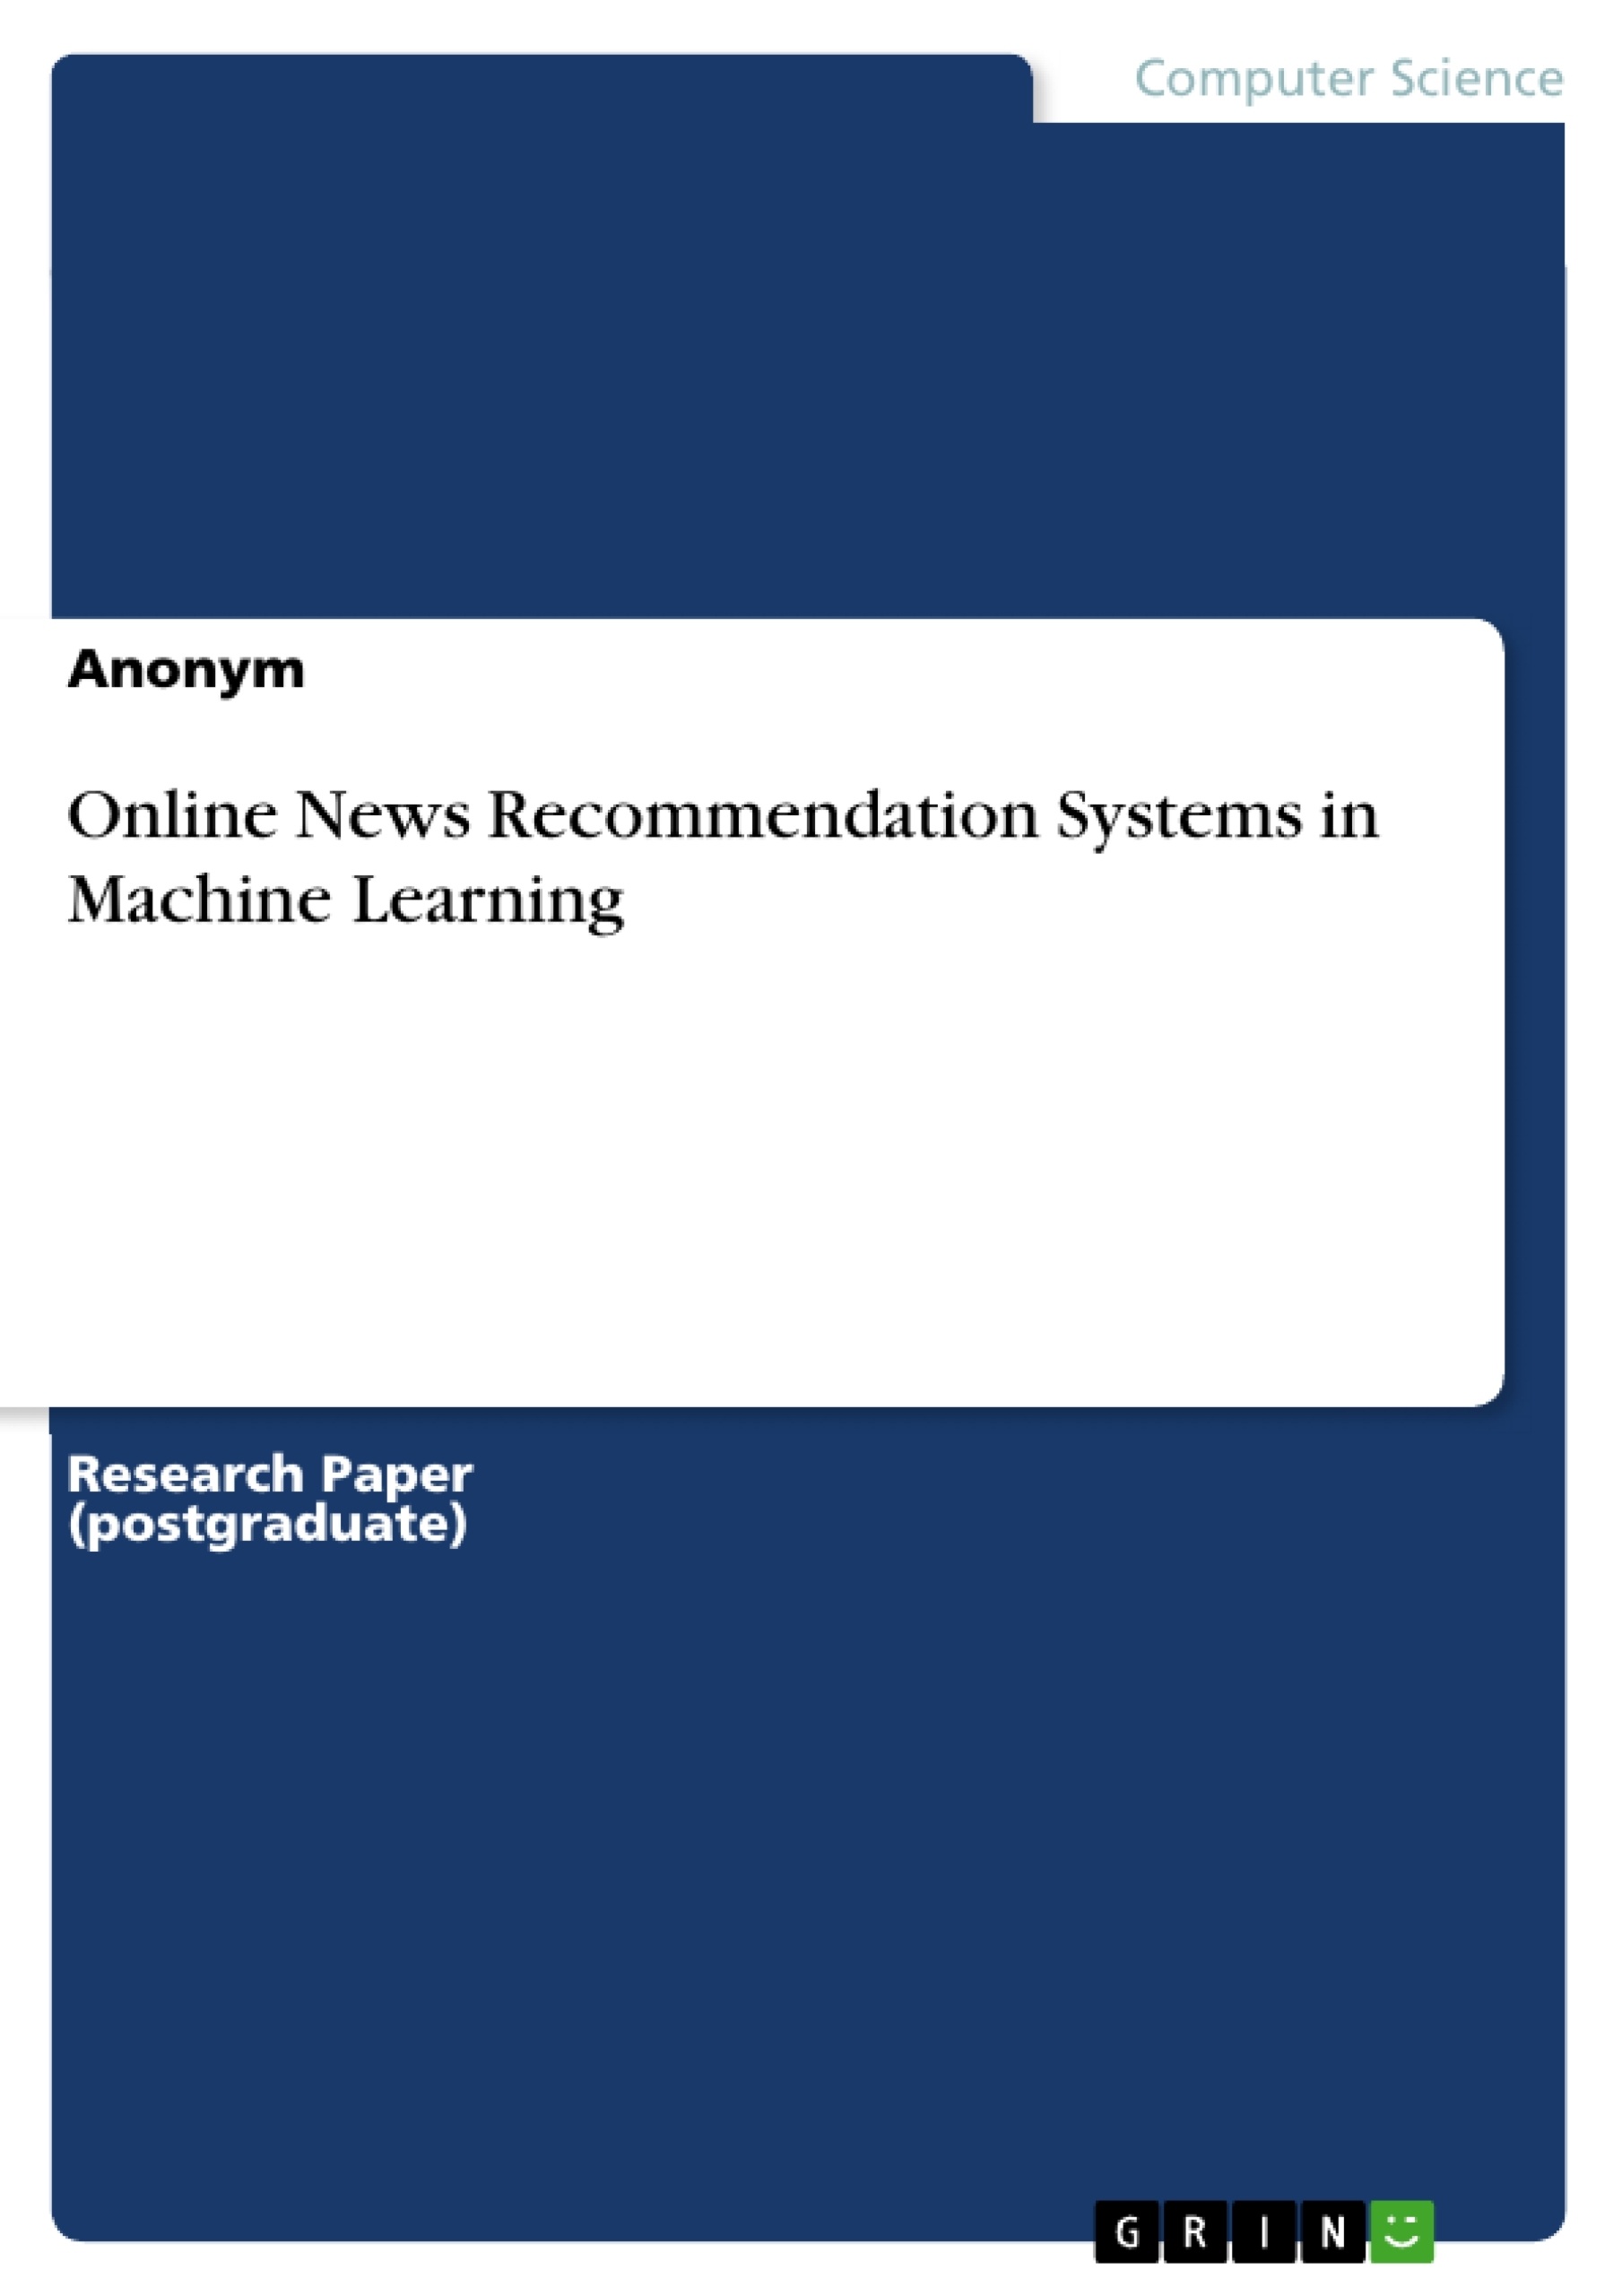 Title: Online News Recommendation Systems in Machine Learning